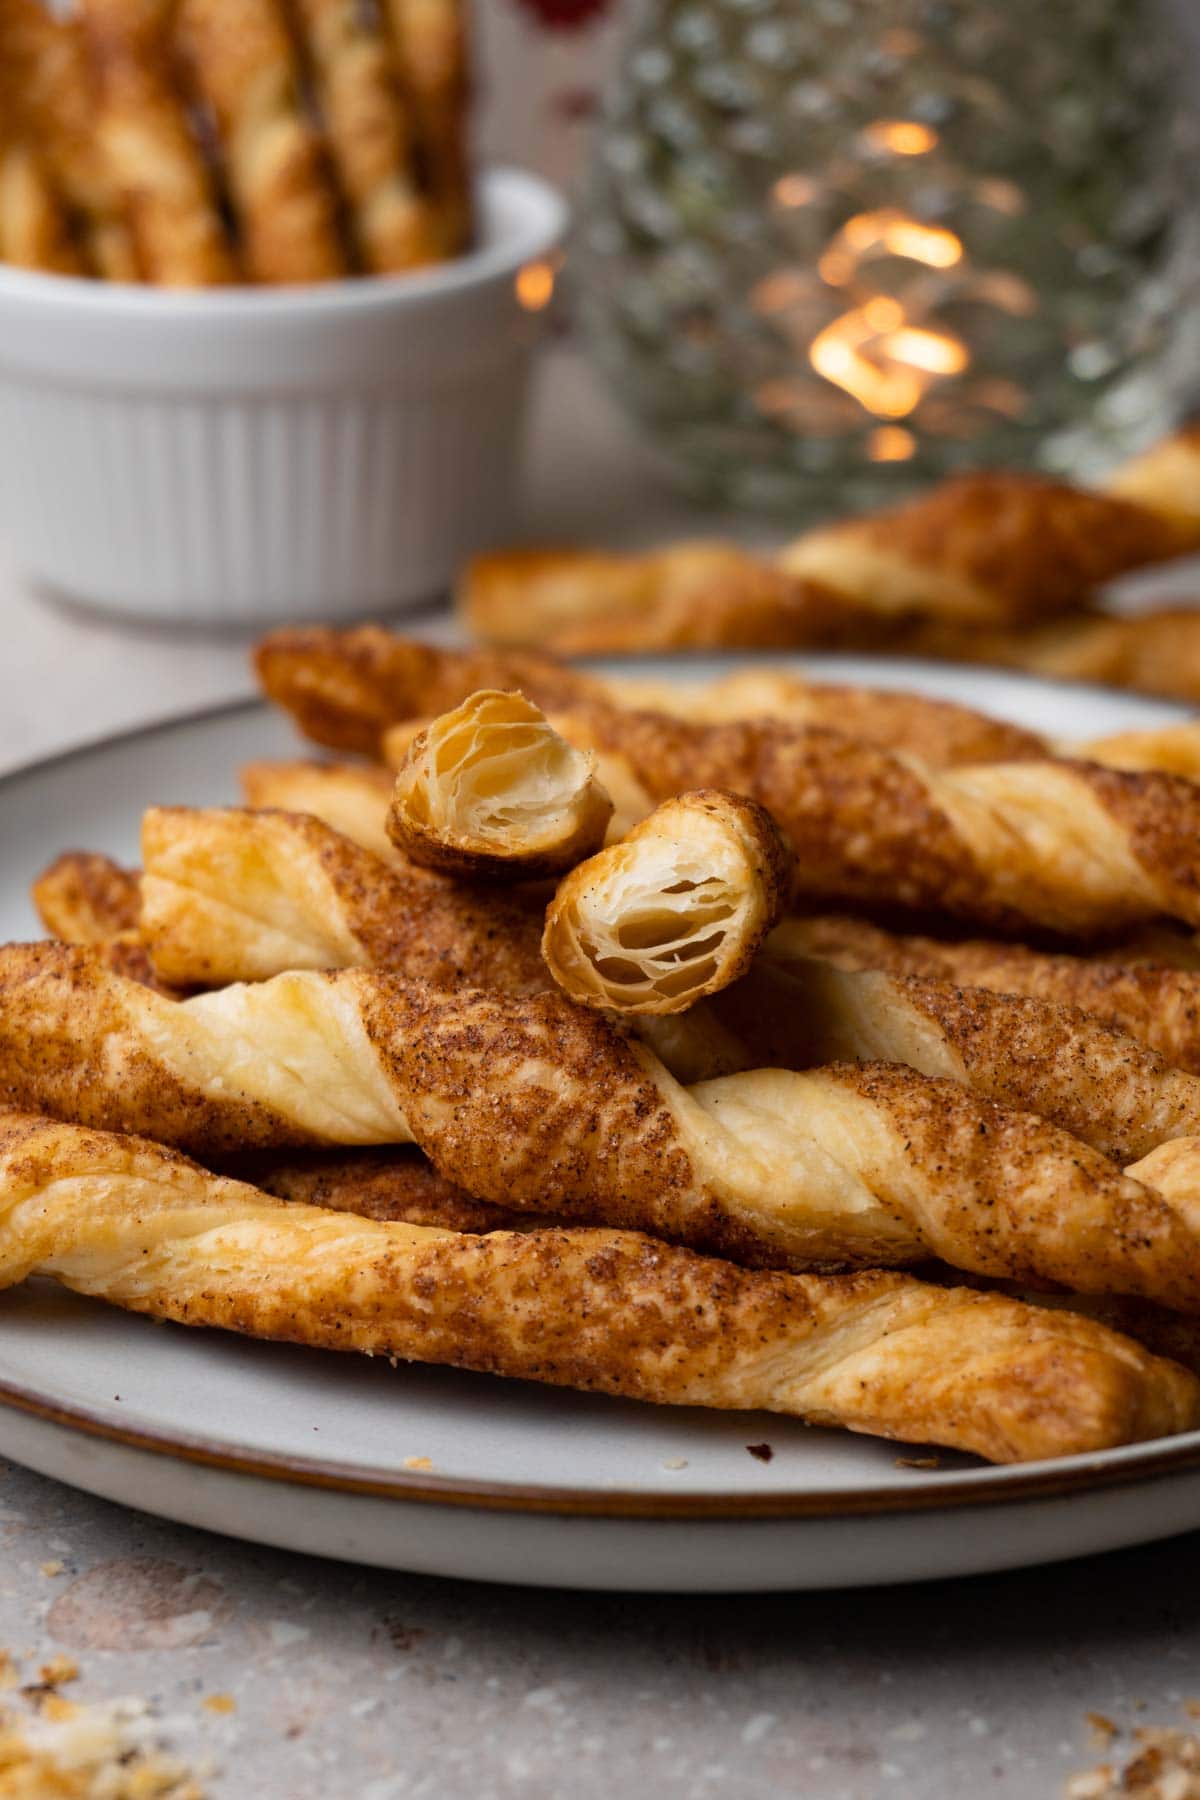 Puff pastry twists with cinnamon sugar topping on a round plate. One stick was broken in half.